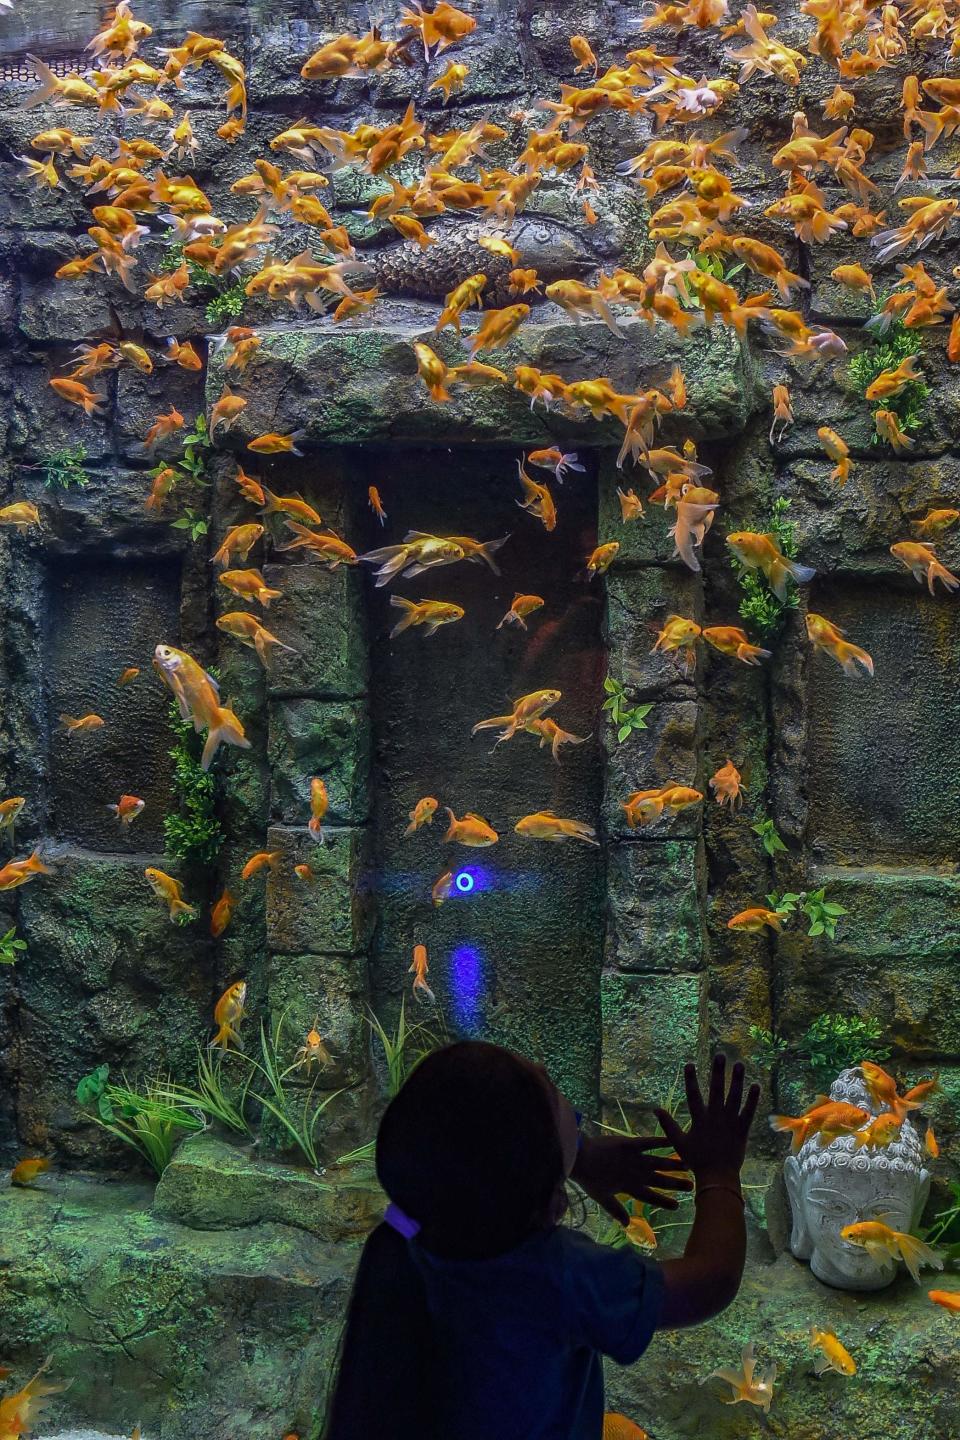 A visitor looks at fish swimming inside an Aquatic Gallery at the Gujarat Science City.